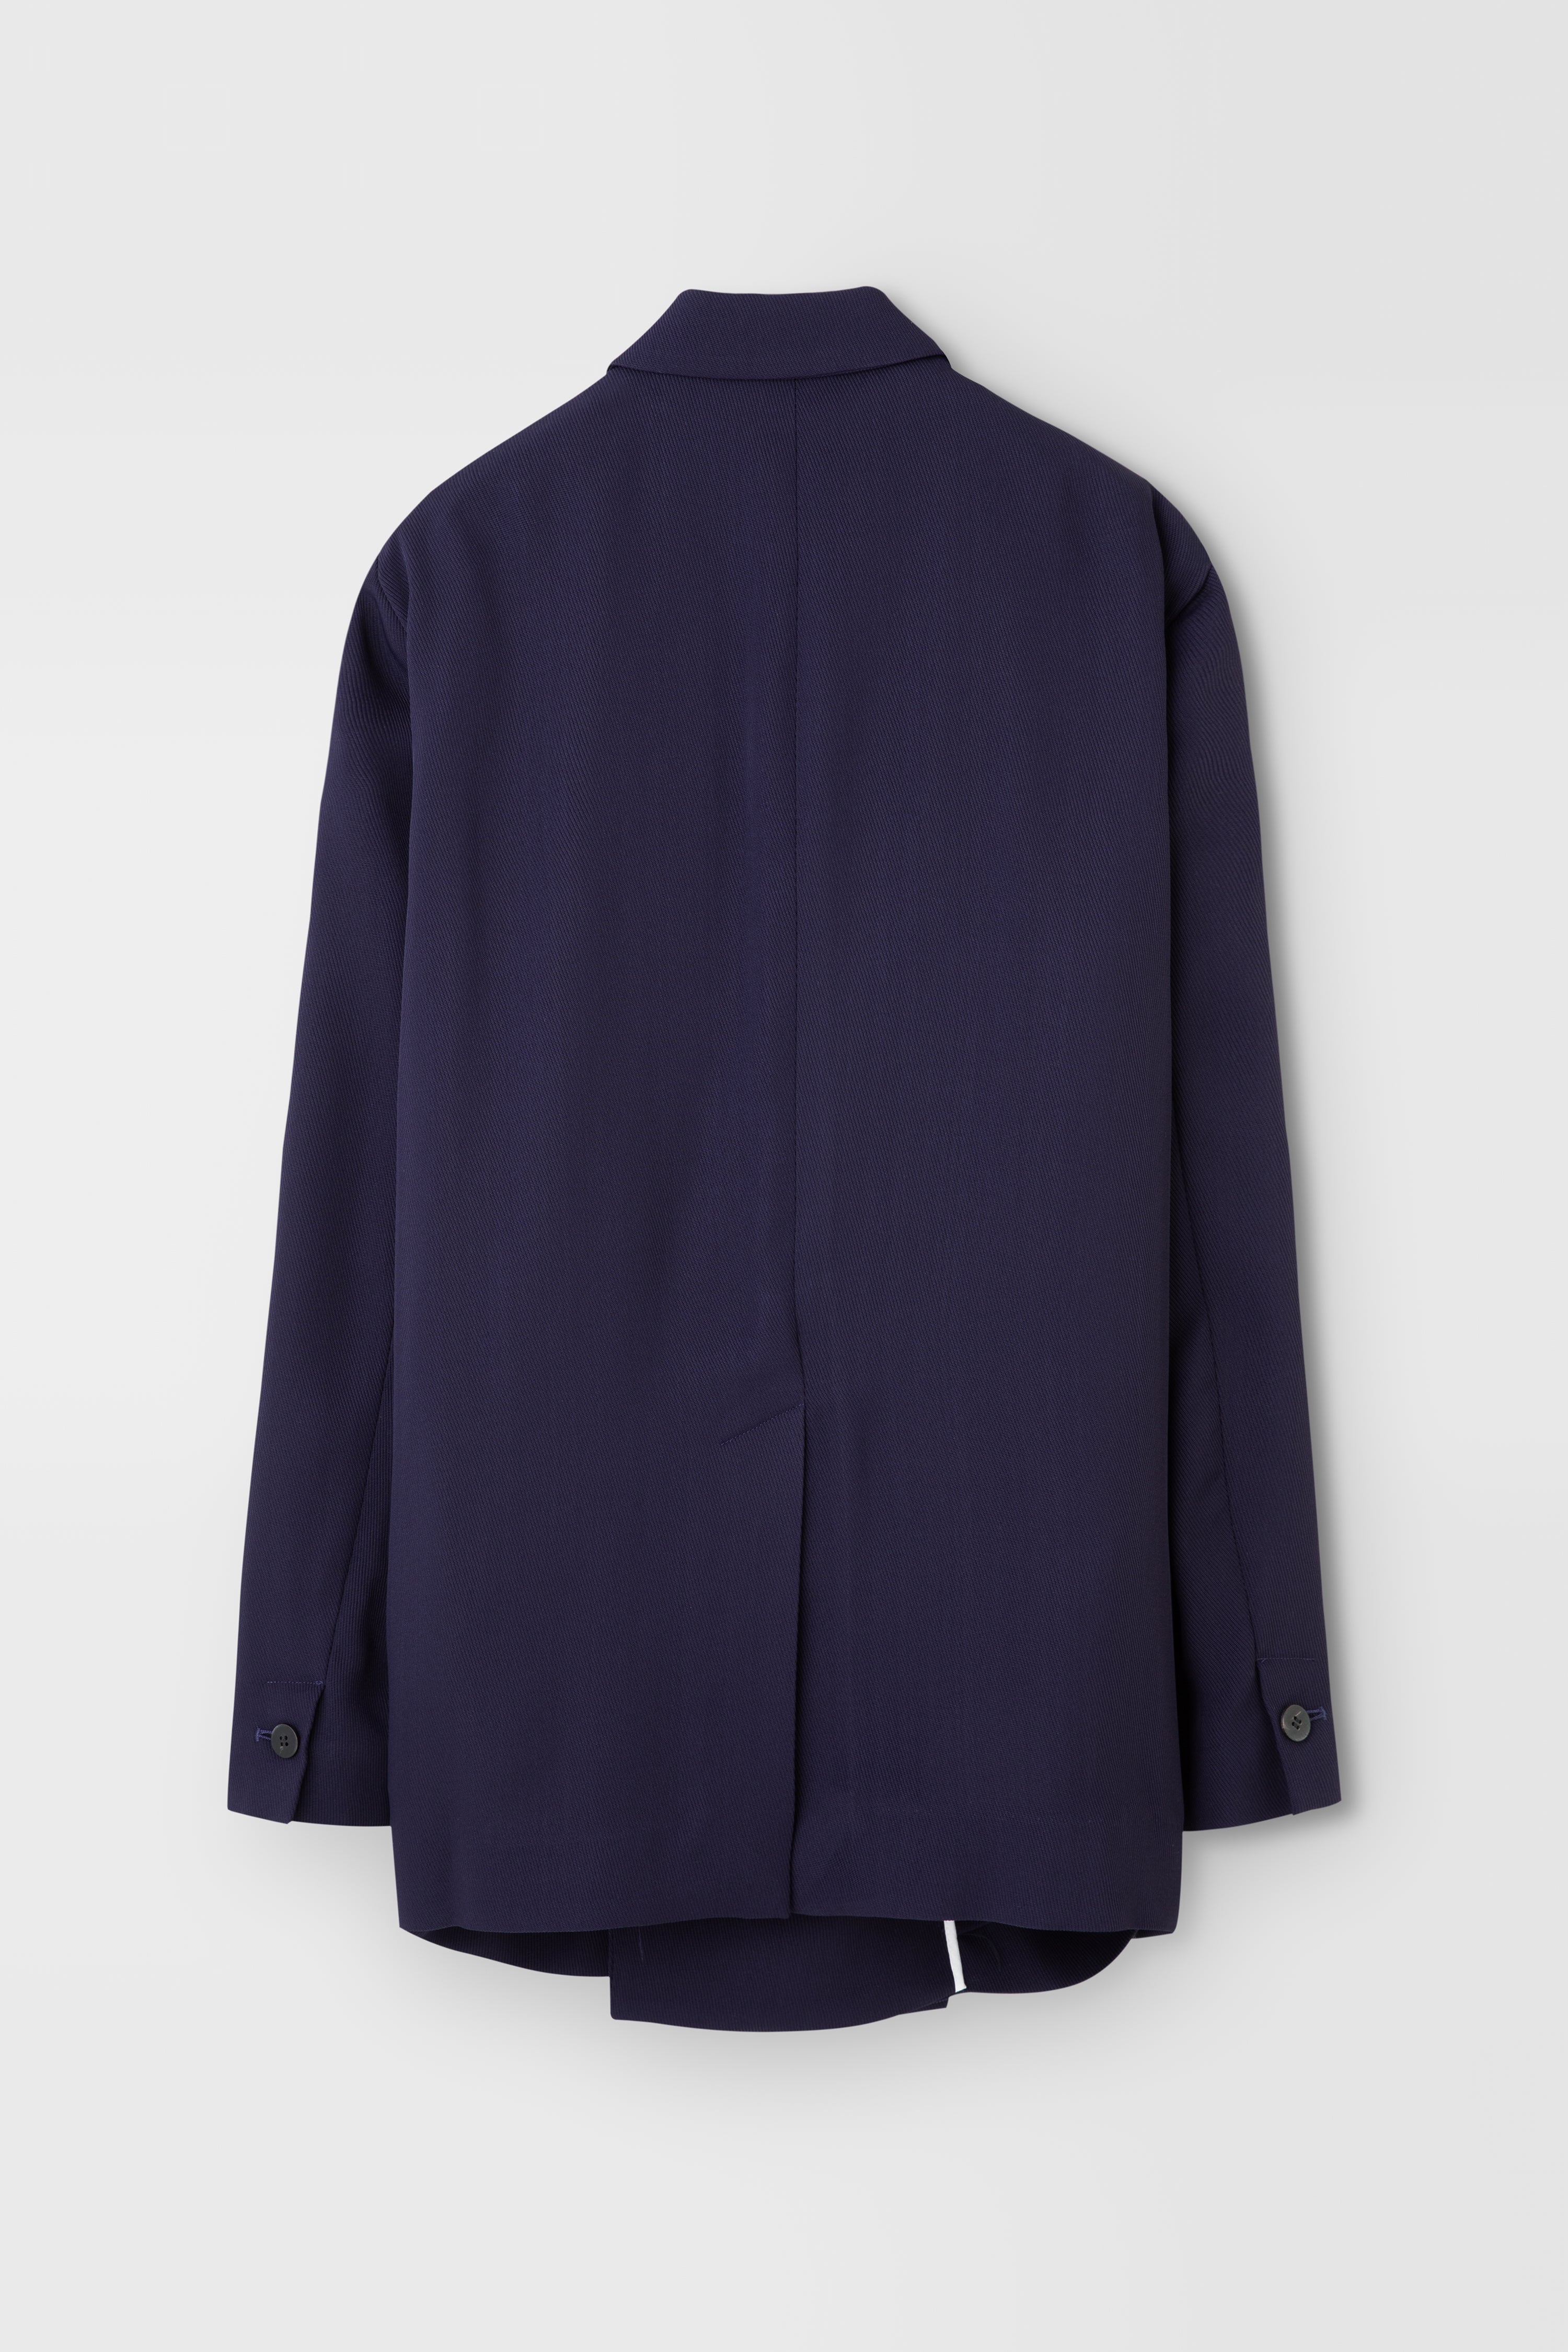 Classic Rayon Tricotine Double Breasted Jacket in Navy